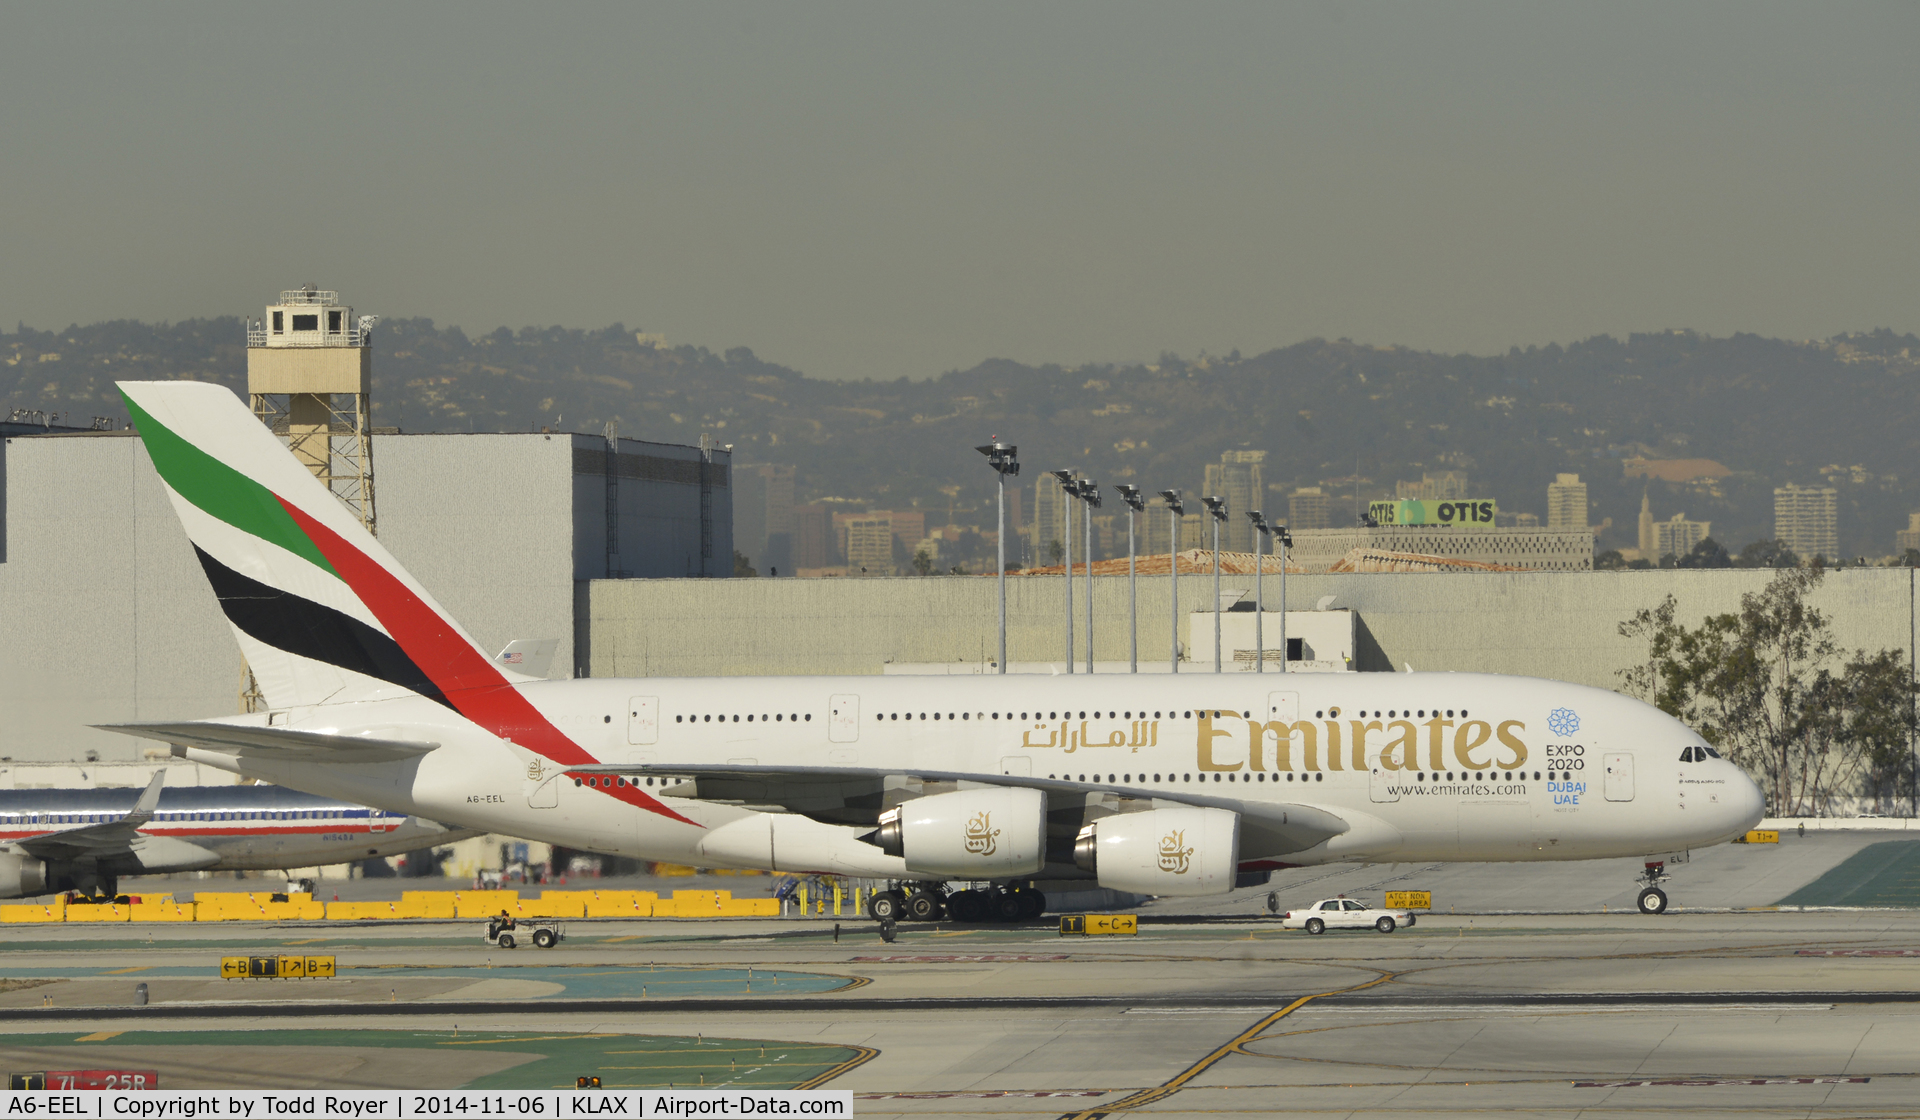 A6-EEL, 2013 Airbus A380-861 C/N 133, Taxiing to gate at LAX